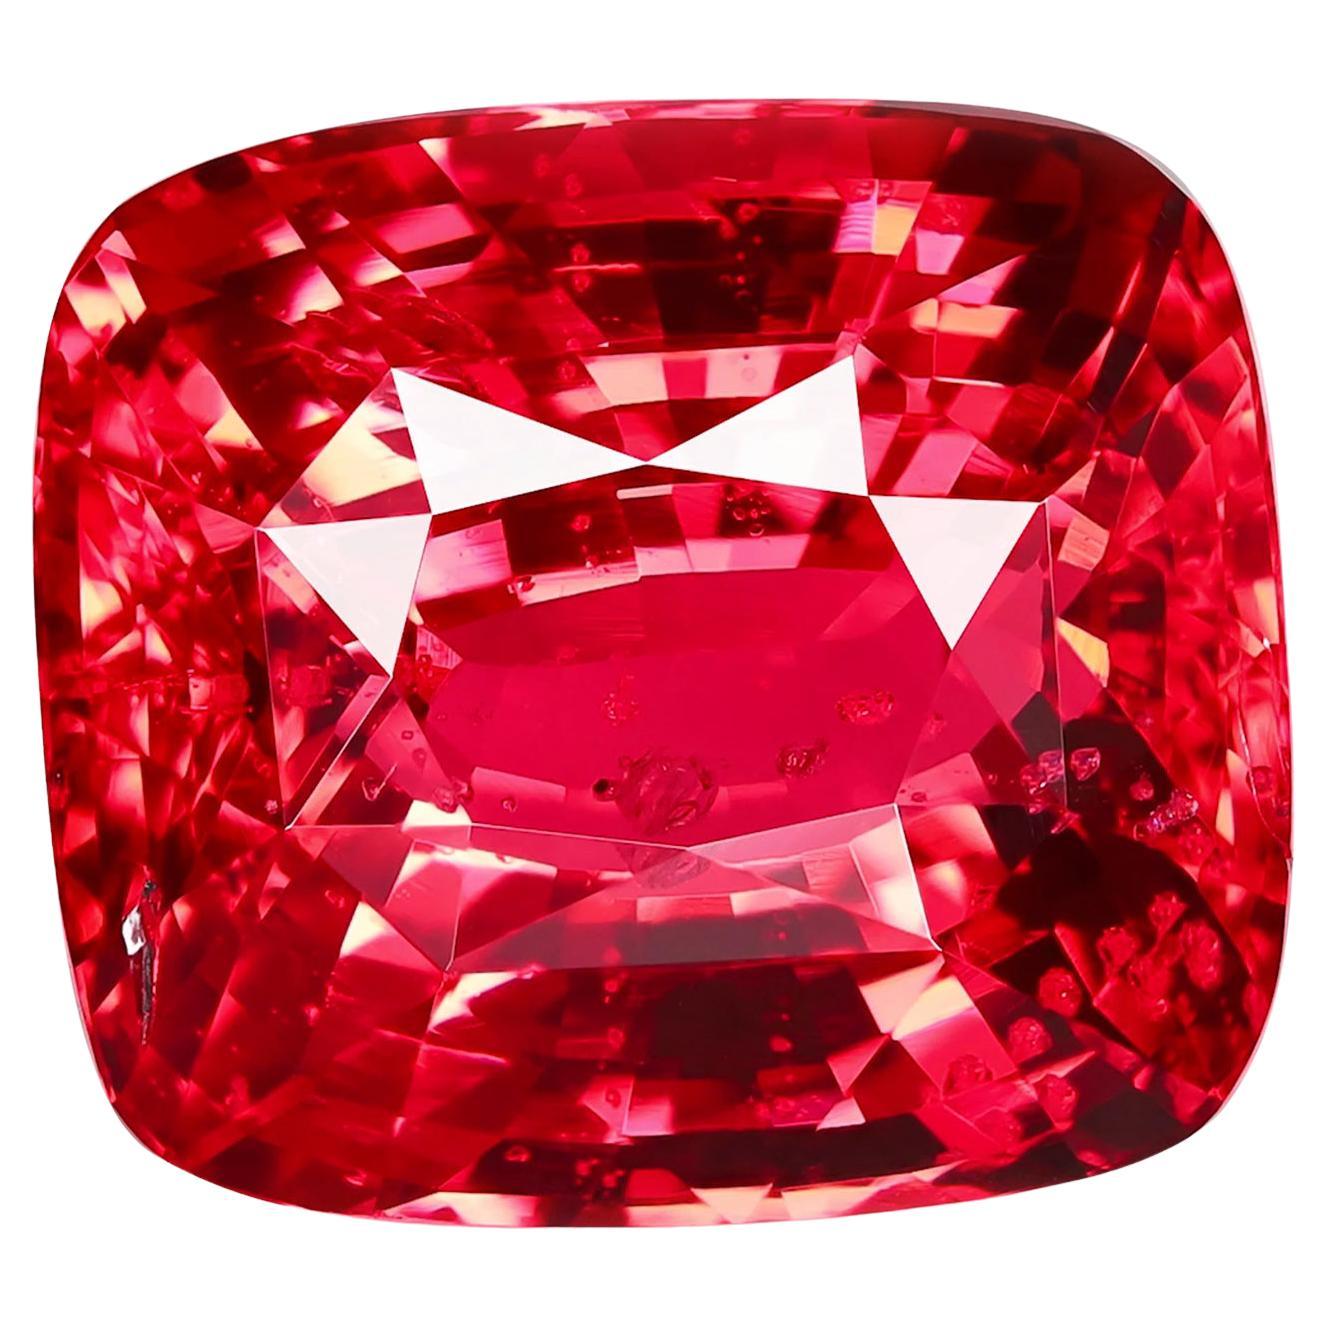 GRS Platinum Awarded 7.07Cts Neon Pinkish Red "Vibrant" Tanzanian Mahenge Spinel For Sale